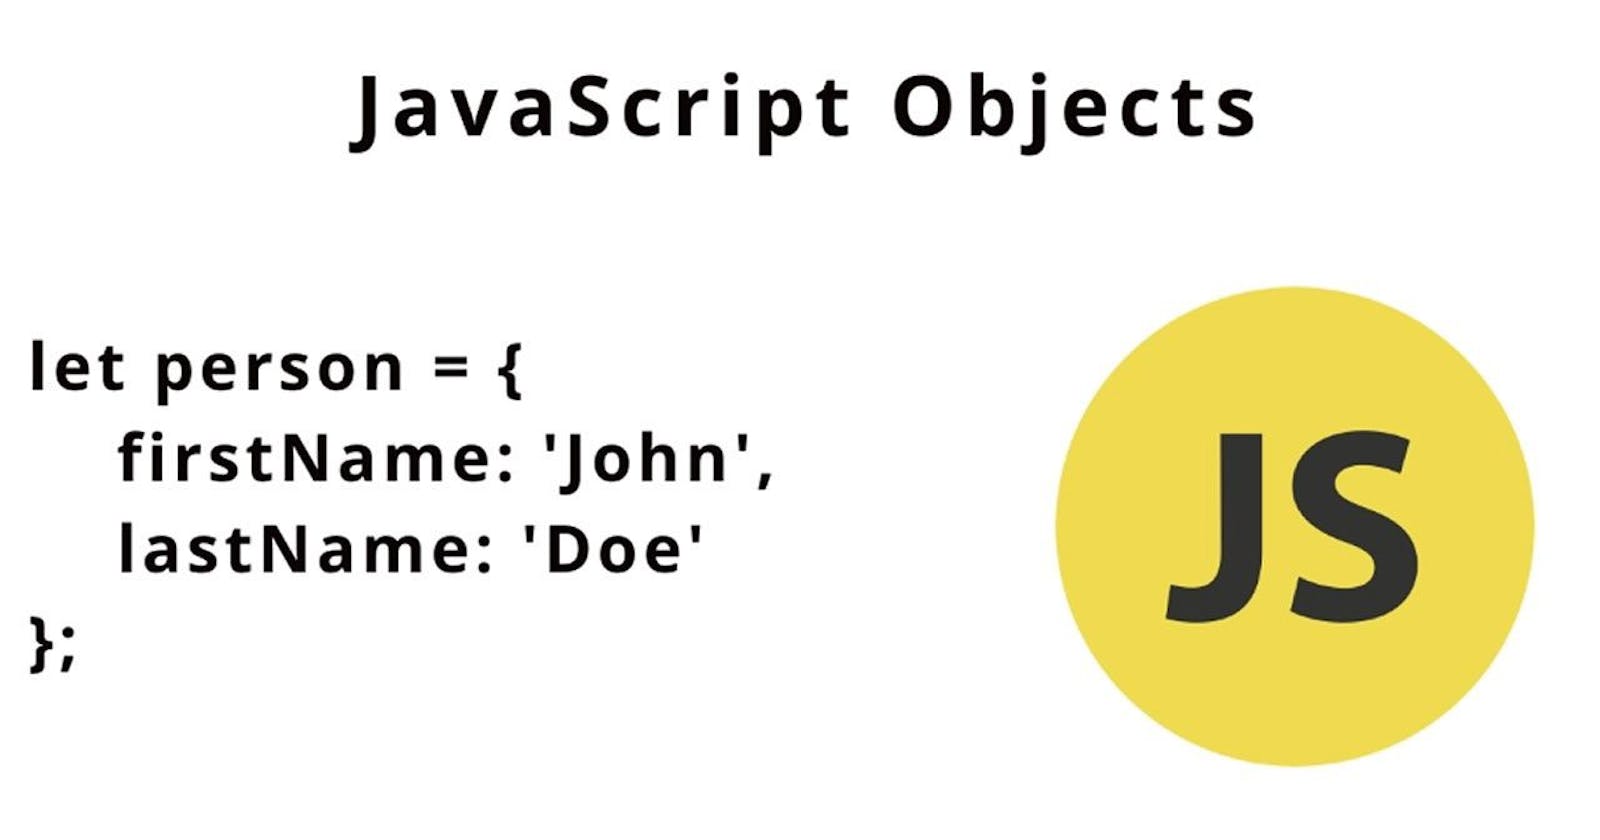 Different ways to create an Object in Javascript.